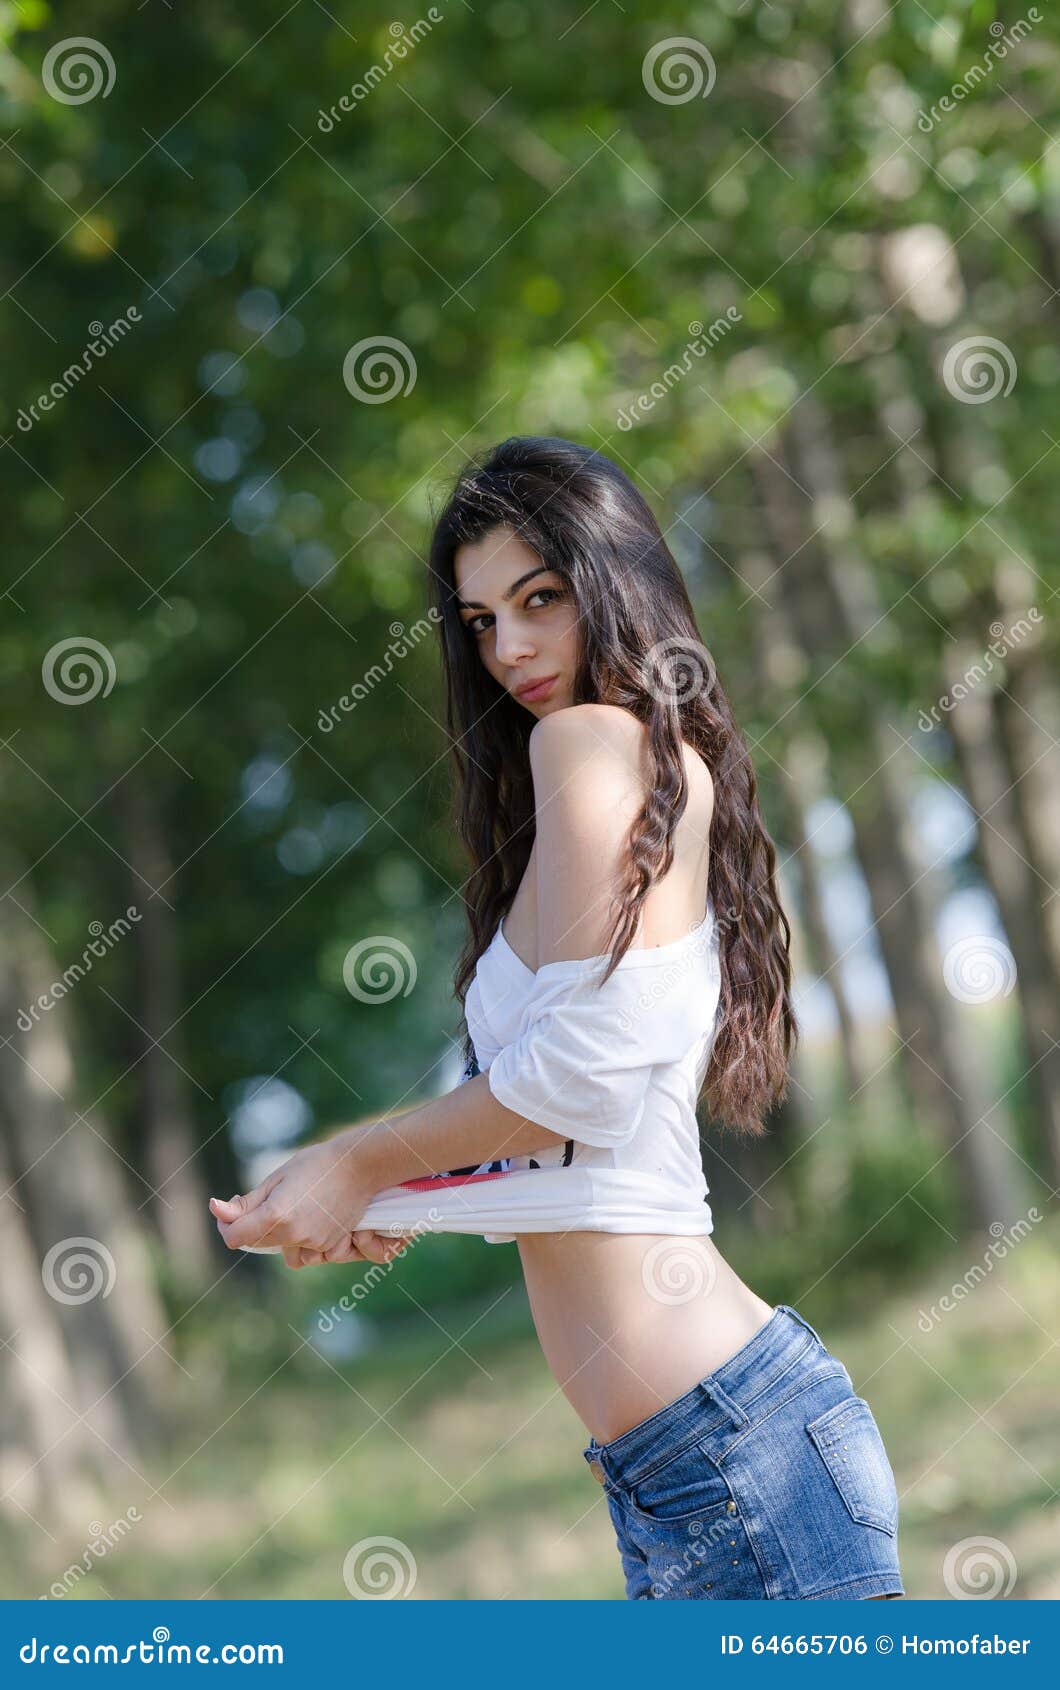 https://thumbs.dreamstime.com/z/slim-brunette-lady-long-hair-playing-her-shirt-reveals-her-flat-belly-as-lift-standing-profile-facing-64665706.jpg